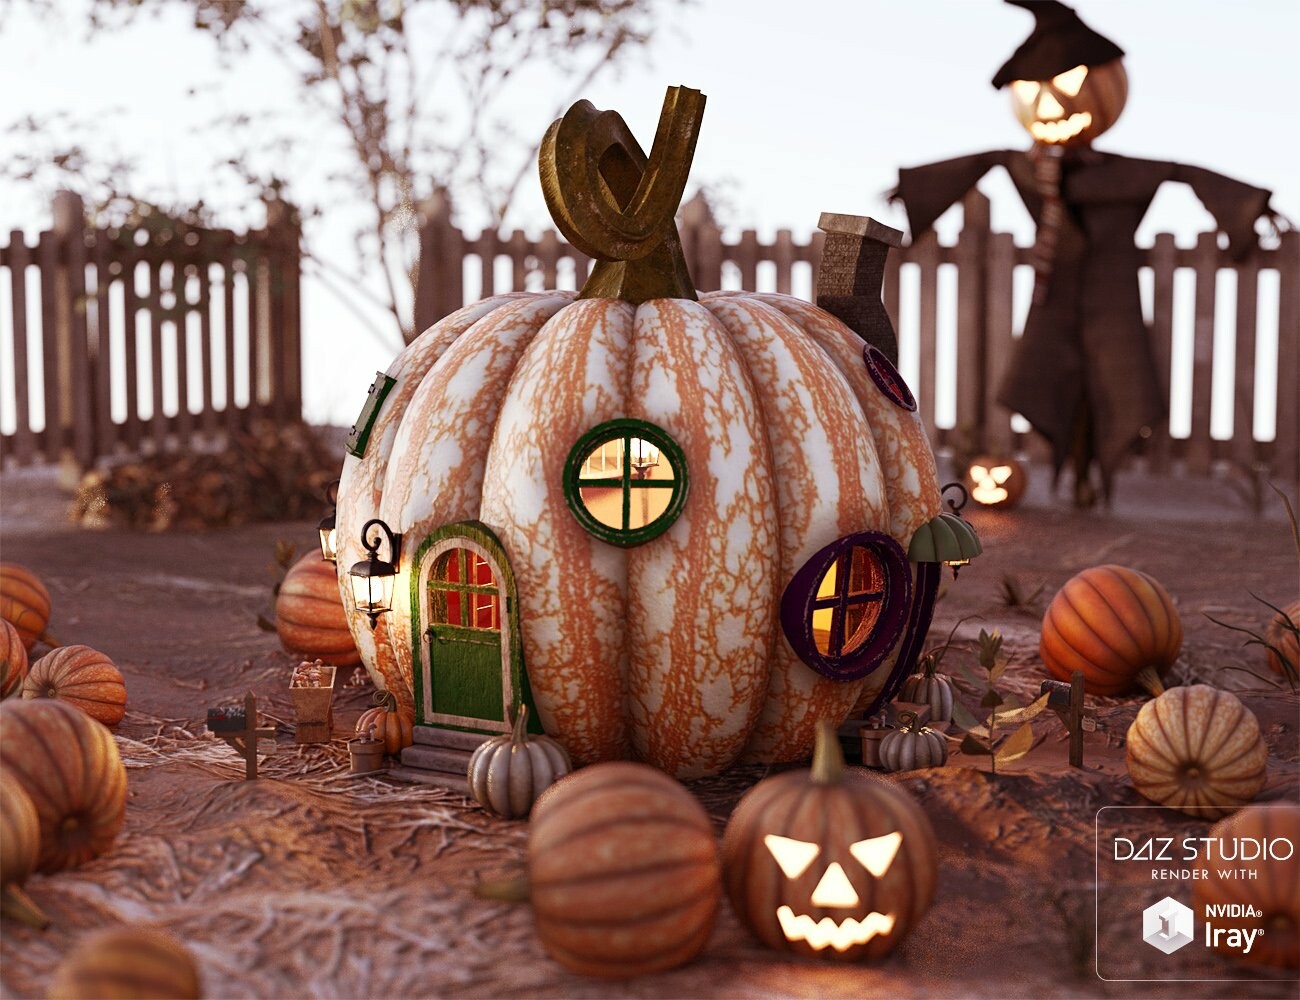 A cute little Pumpkin House, complete with fully rigged Doors and Windows. 